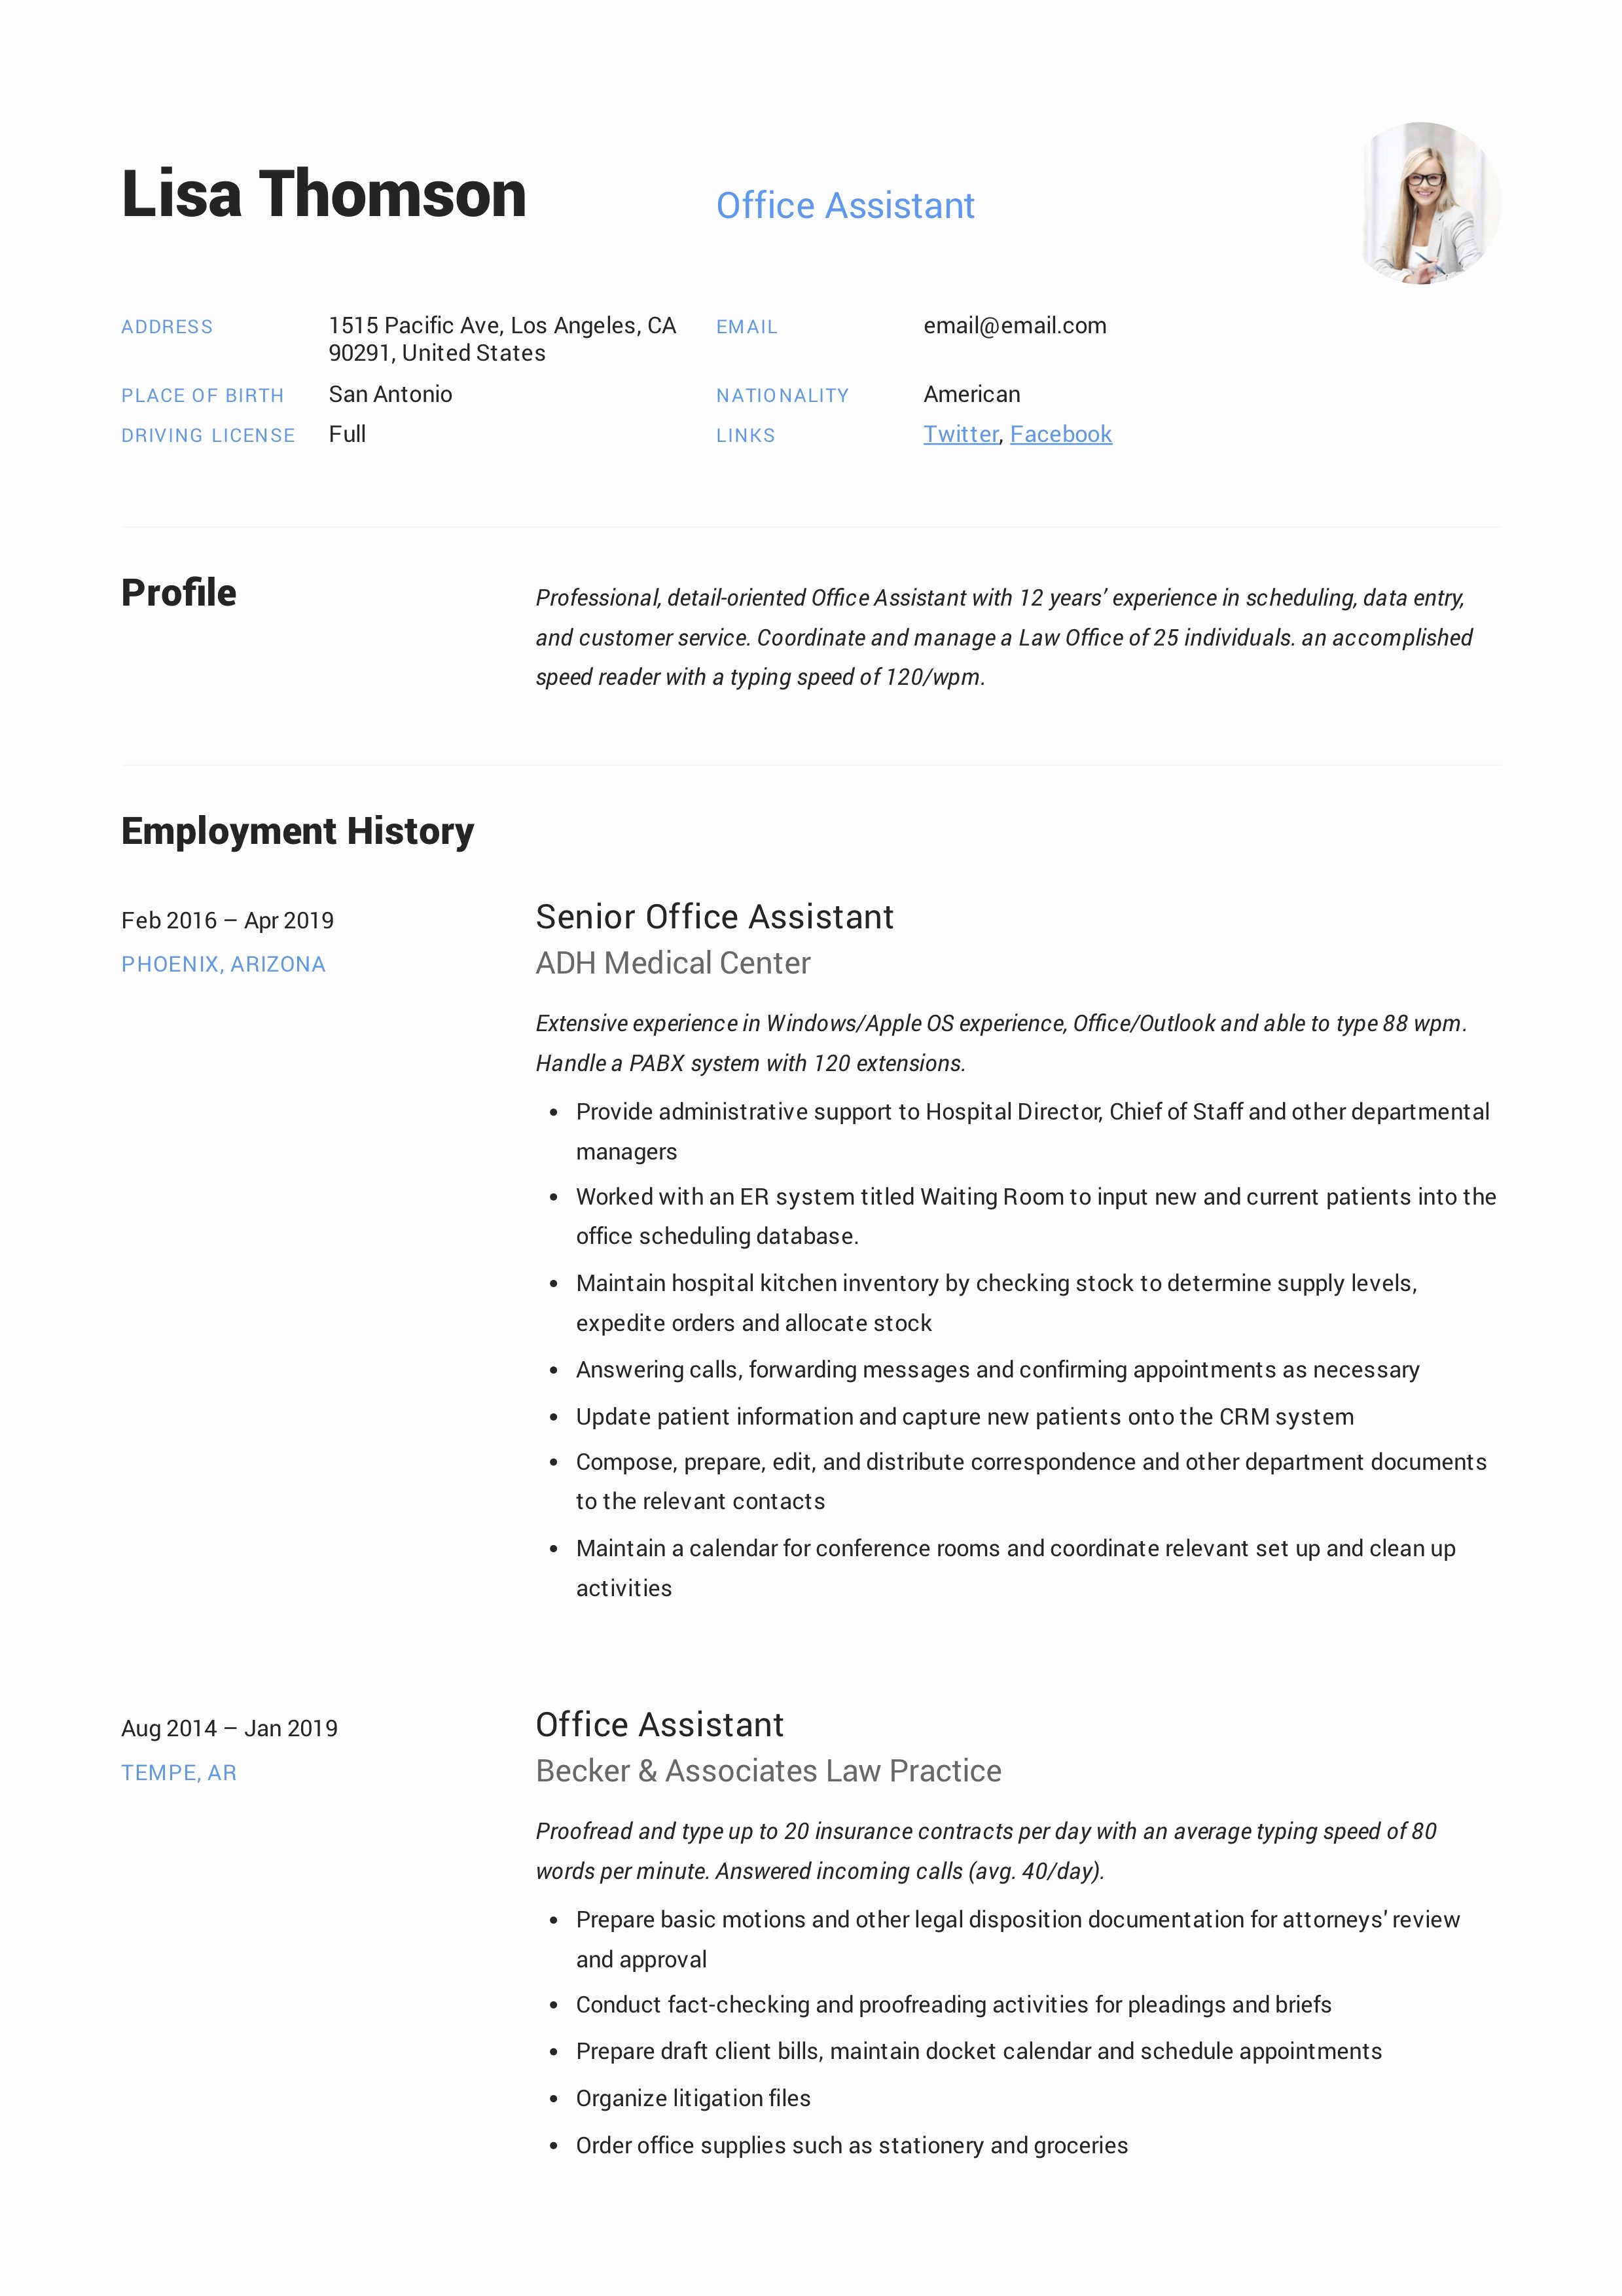 Office assistant Resume Template Beautiful Fice assistant Resume Writing Guide